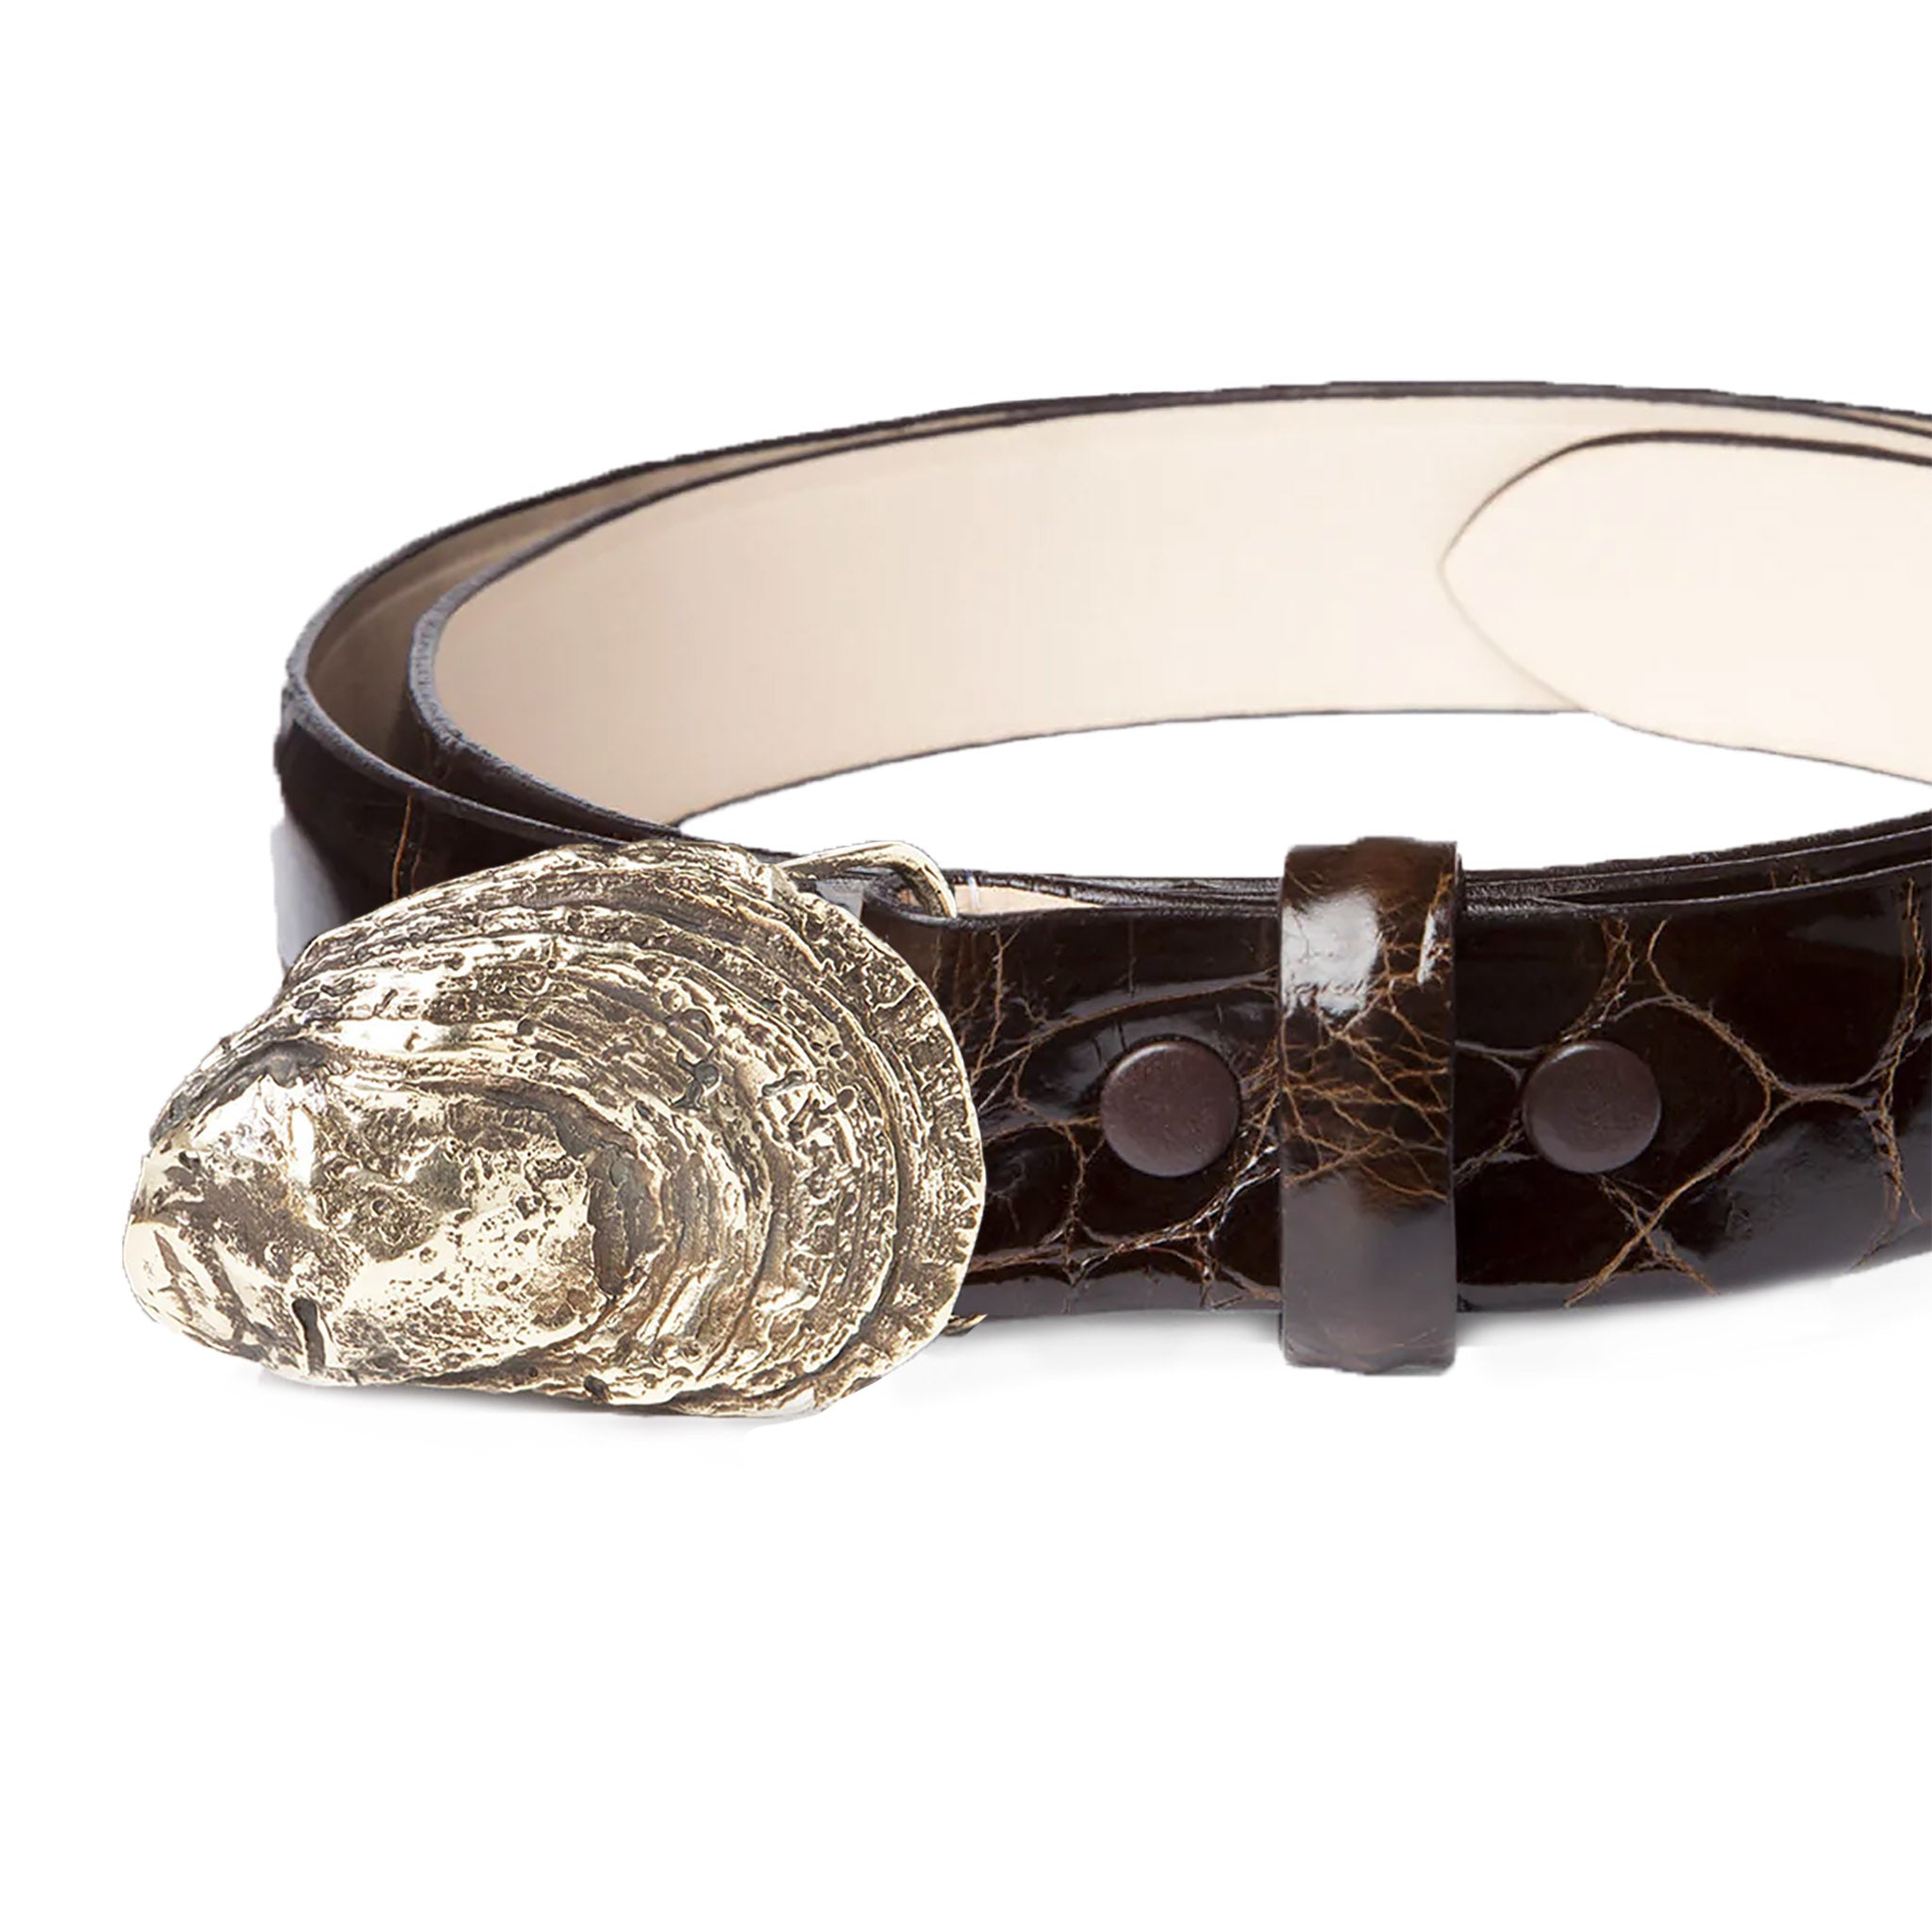 Oyster Shell Buckle with Glazed Brown Alligator Leather Belt Strap